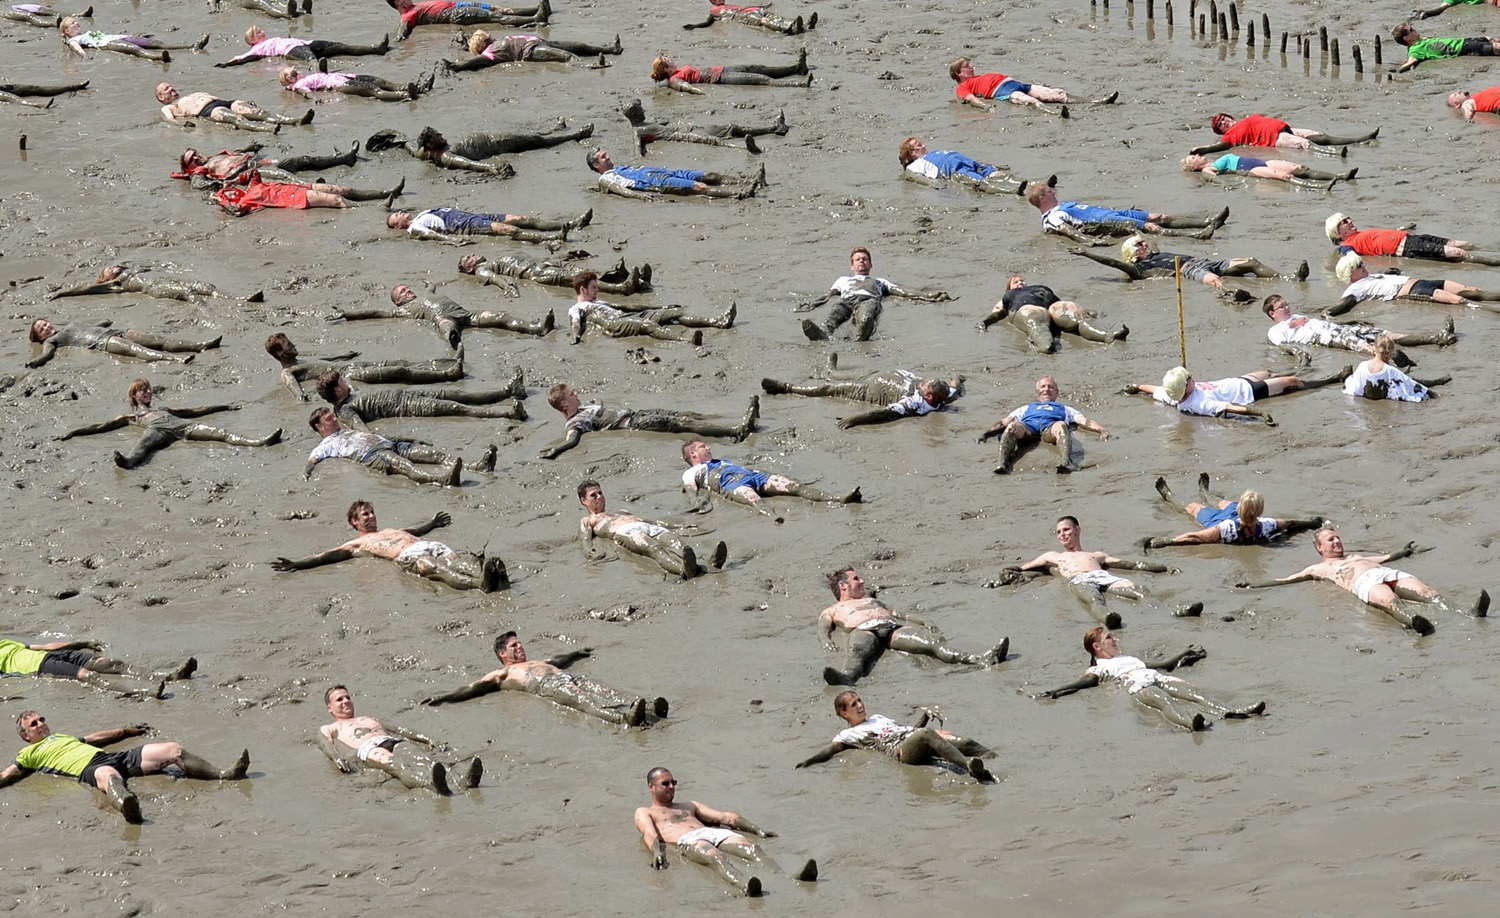 Some of the 350 participants lie on their backs in mudflats as part of a record attempt event for the 2014 Mudflat Olympics, outside of the city of Brunsbuettel, northern Germany, July 6, 2014.